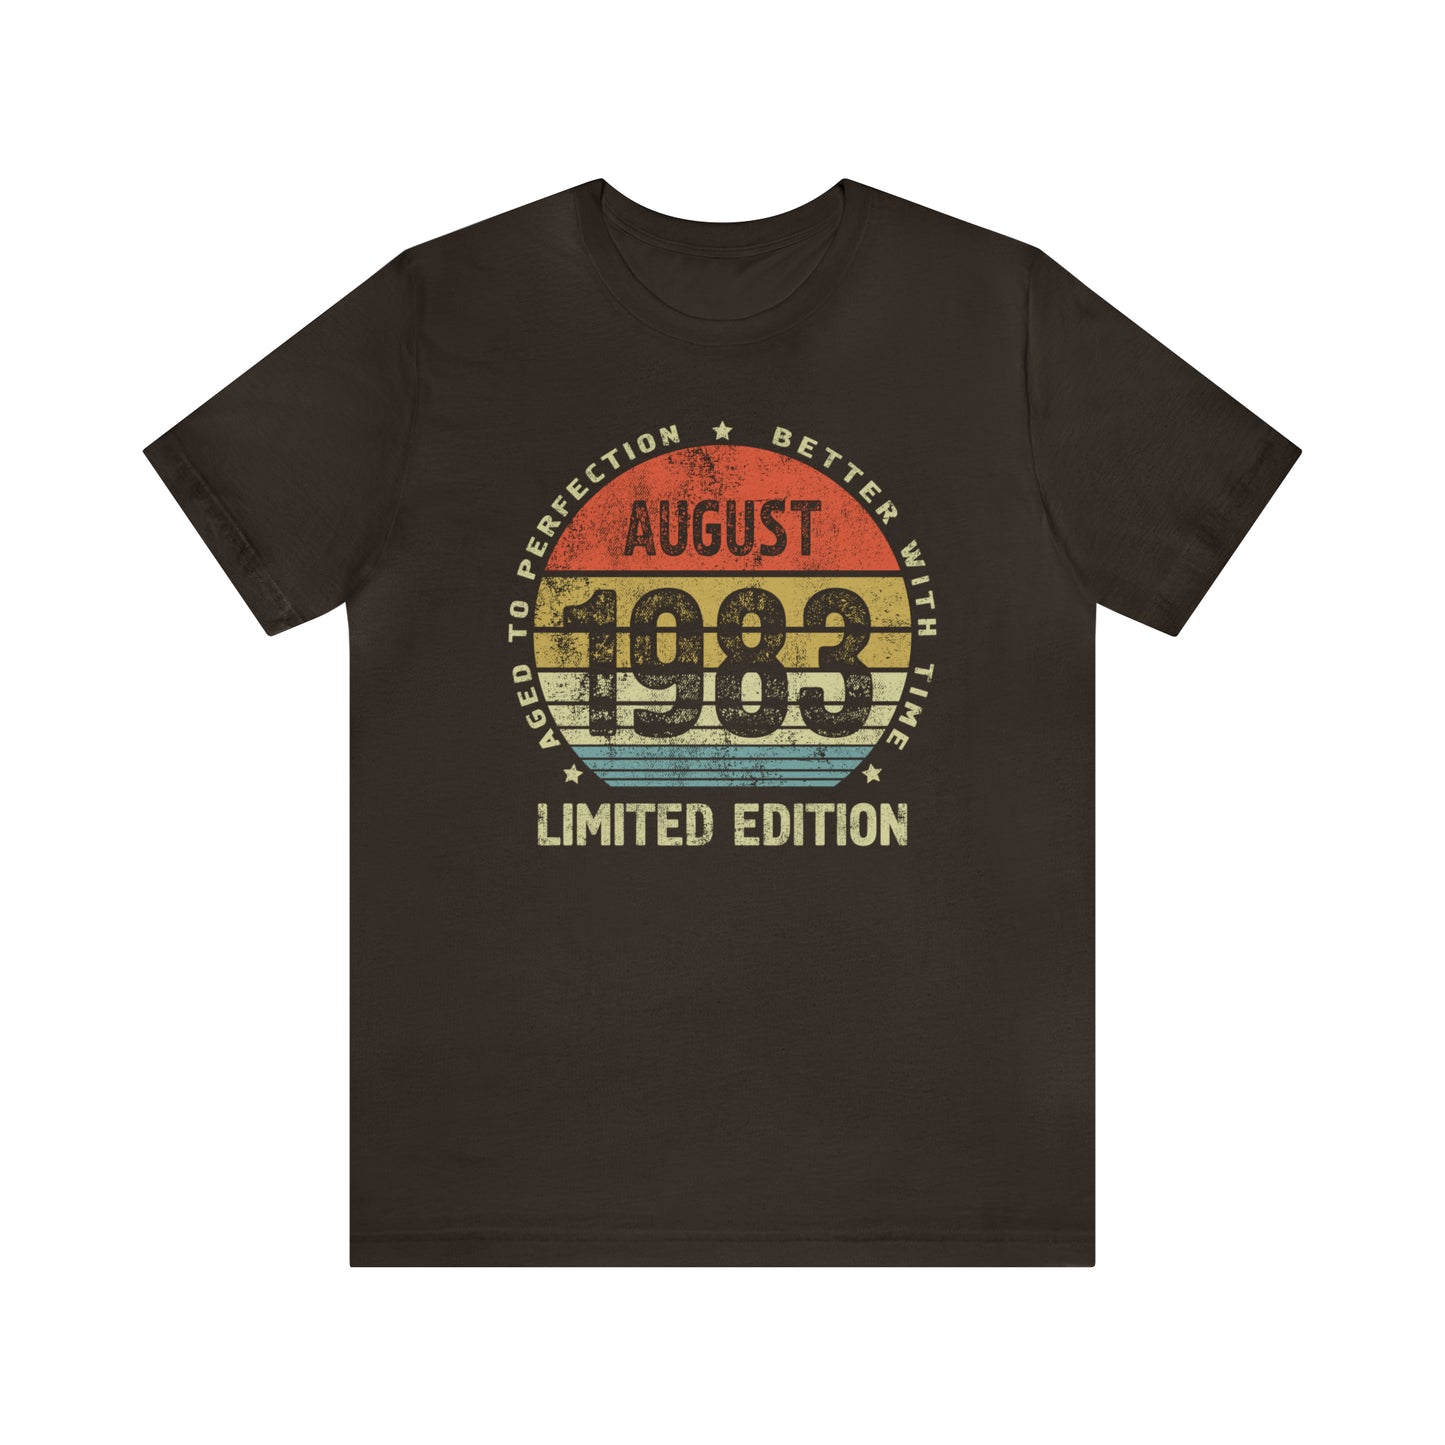 40th birthday gift for men or women, August 1983 birthday gift shirt for wife or husband, 40 anniversary Shirt for brother or sister